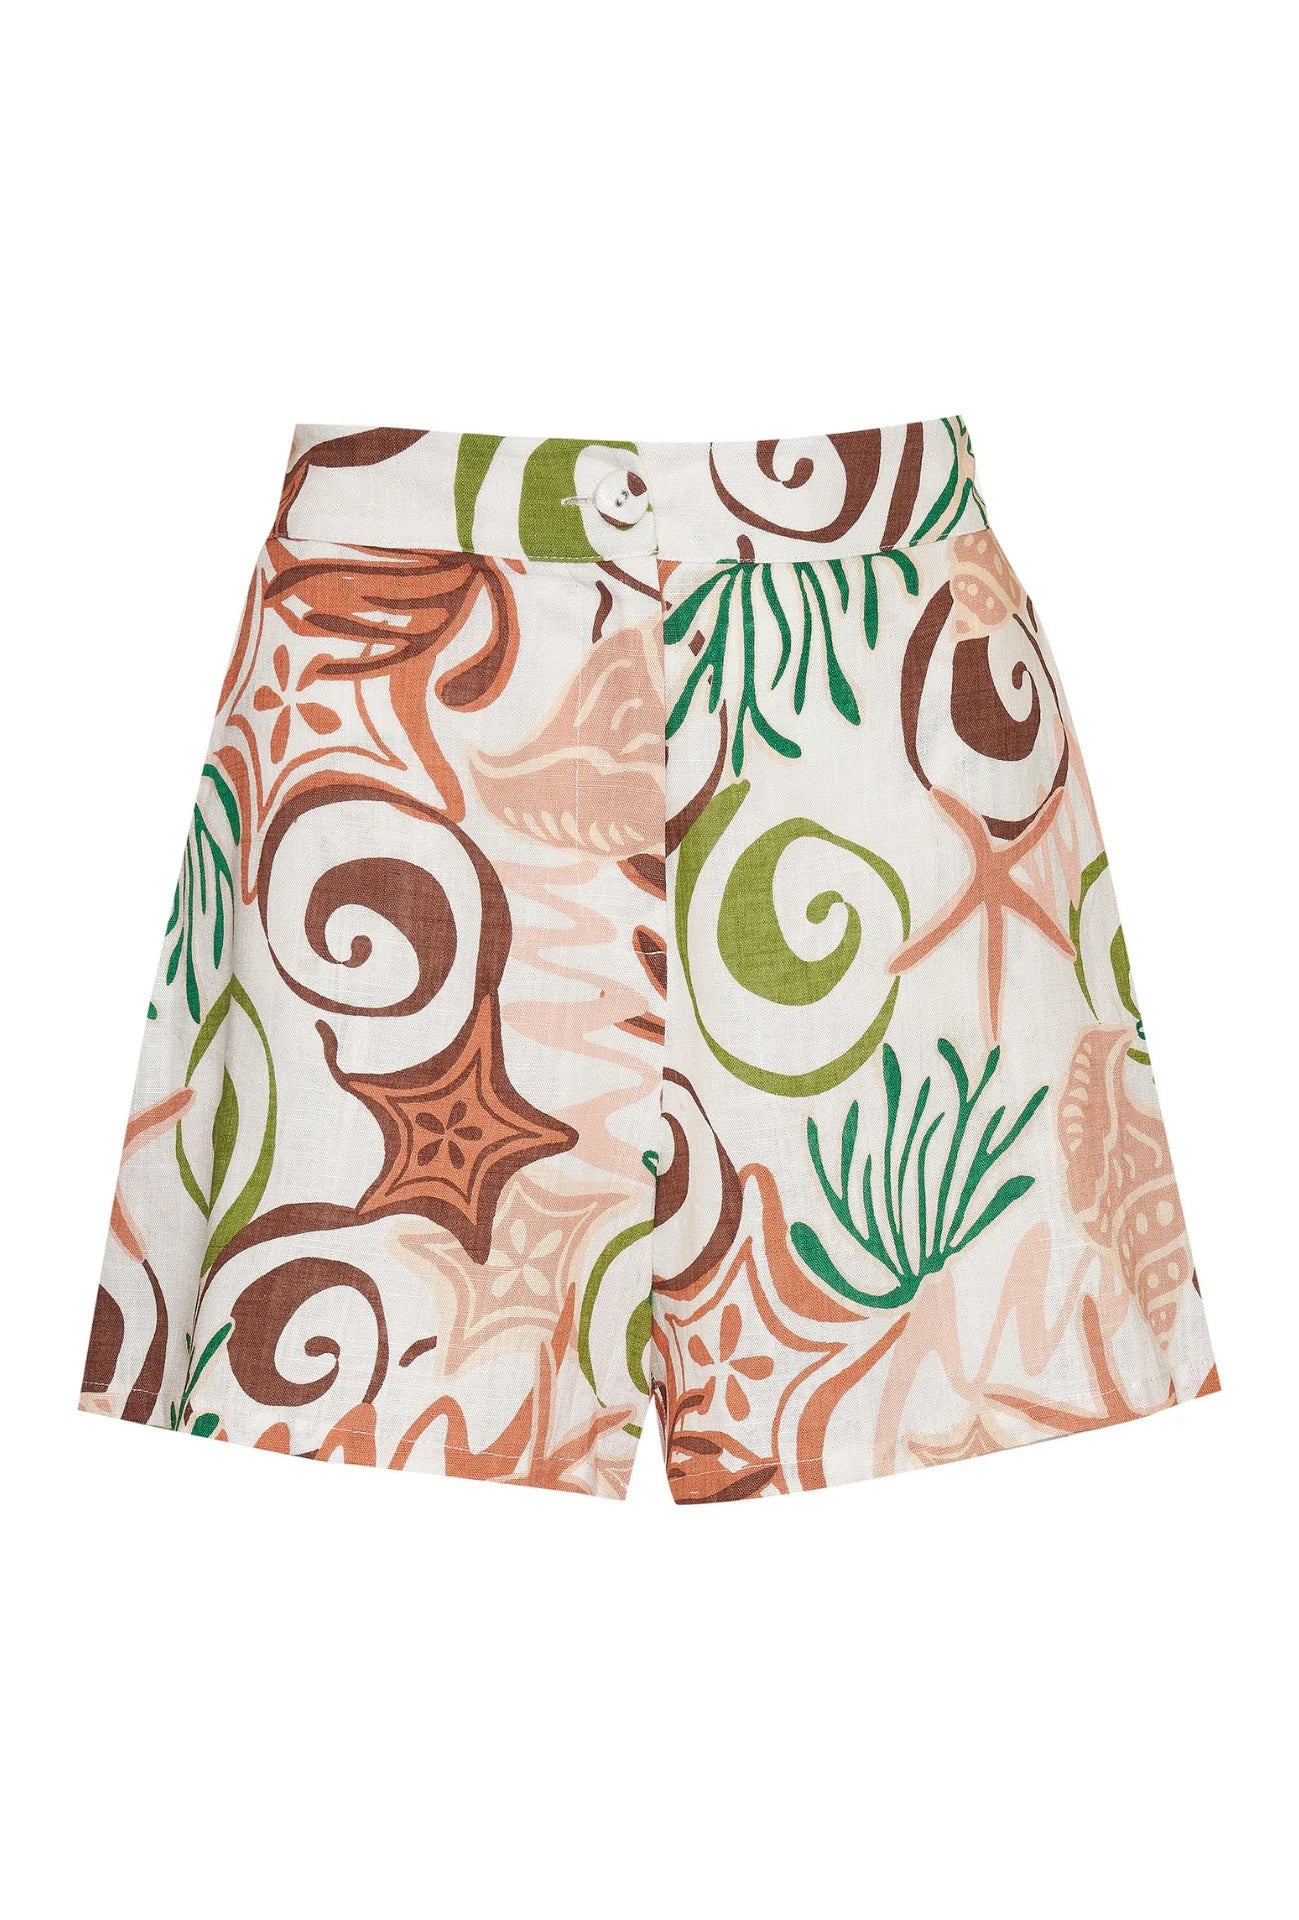 Our Gilly Shorts in Koralli Print are perfect to throw on after a beach day and co-ordinate with our matching Cynthia Top.